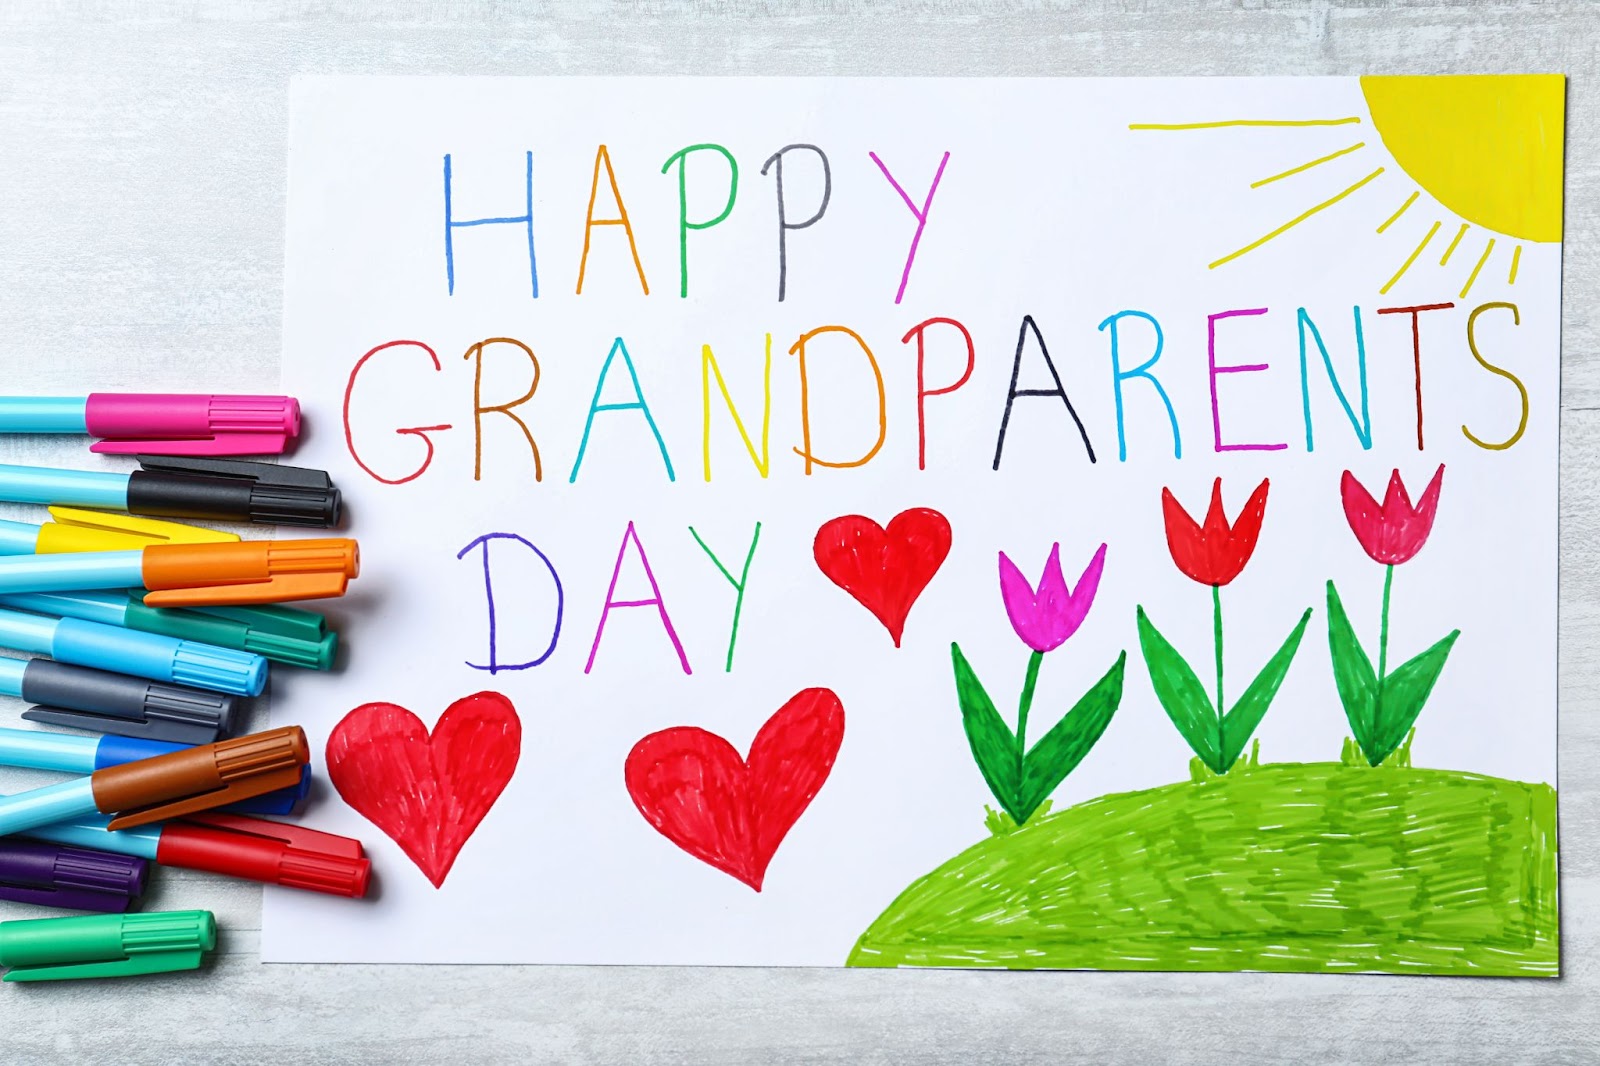 33 DIY Christmas Gifts for Grandparents to Make at Home – REASONS TO SKIP  THE HOUSEWORK